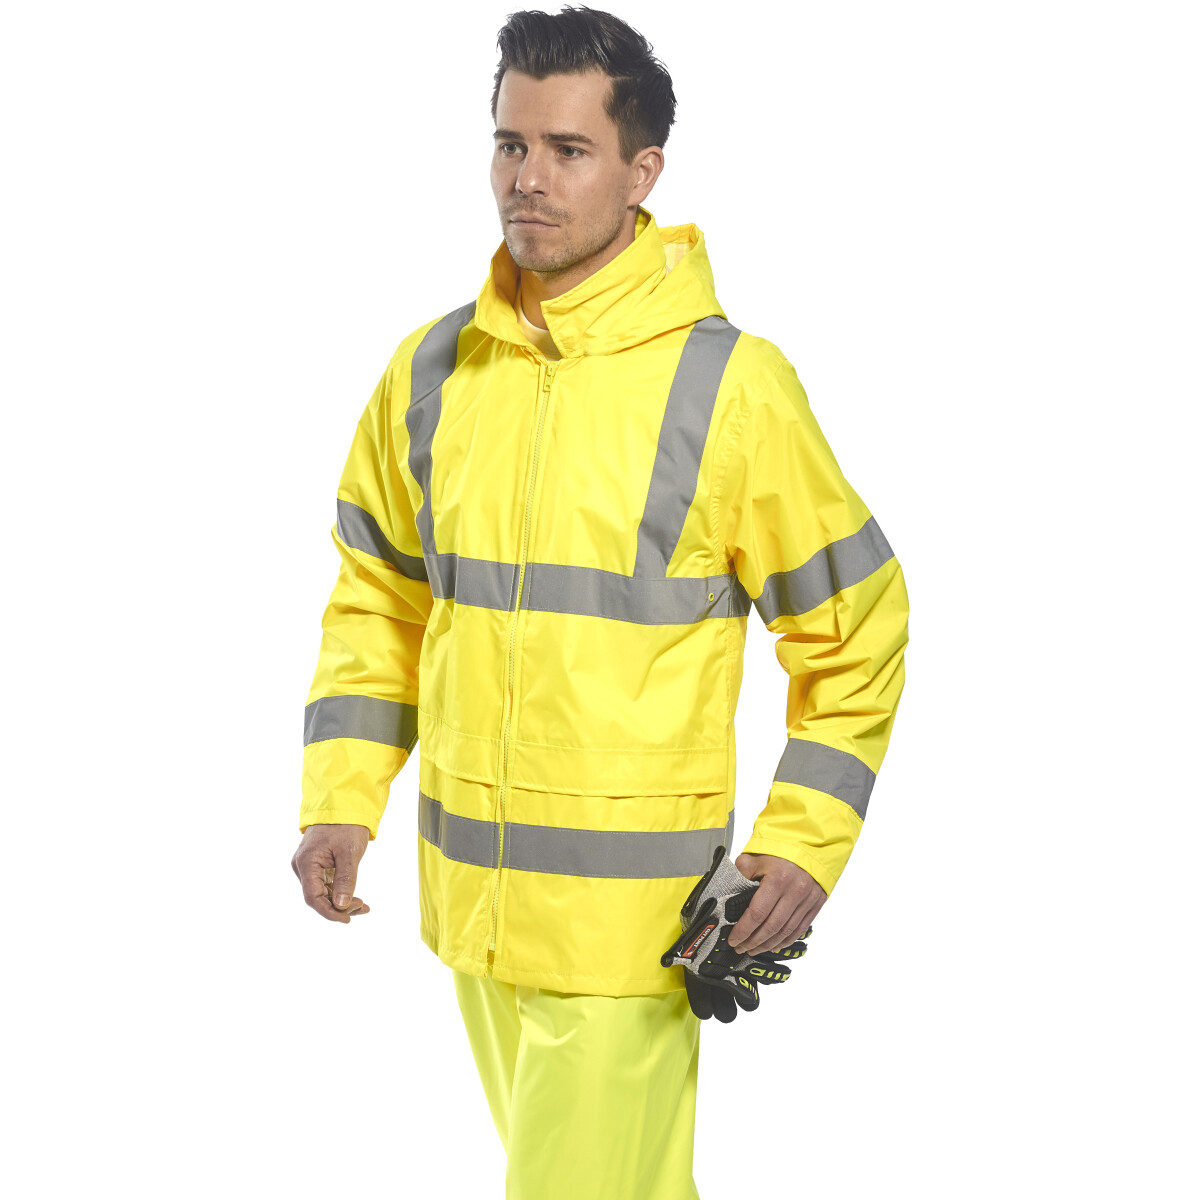 Portwest H440 Hi-Vis Rain Jacket High Visibility Class 3 - Yellow from ...